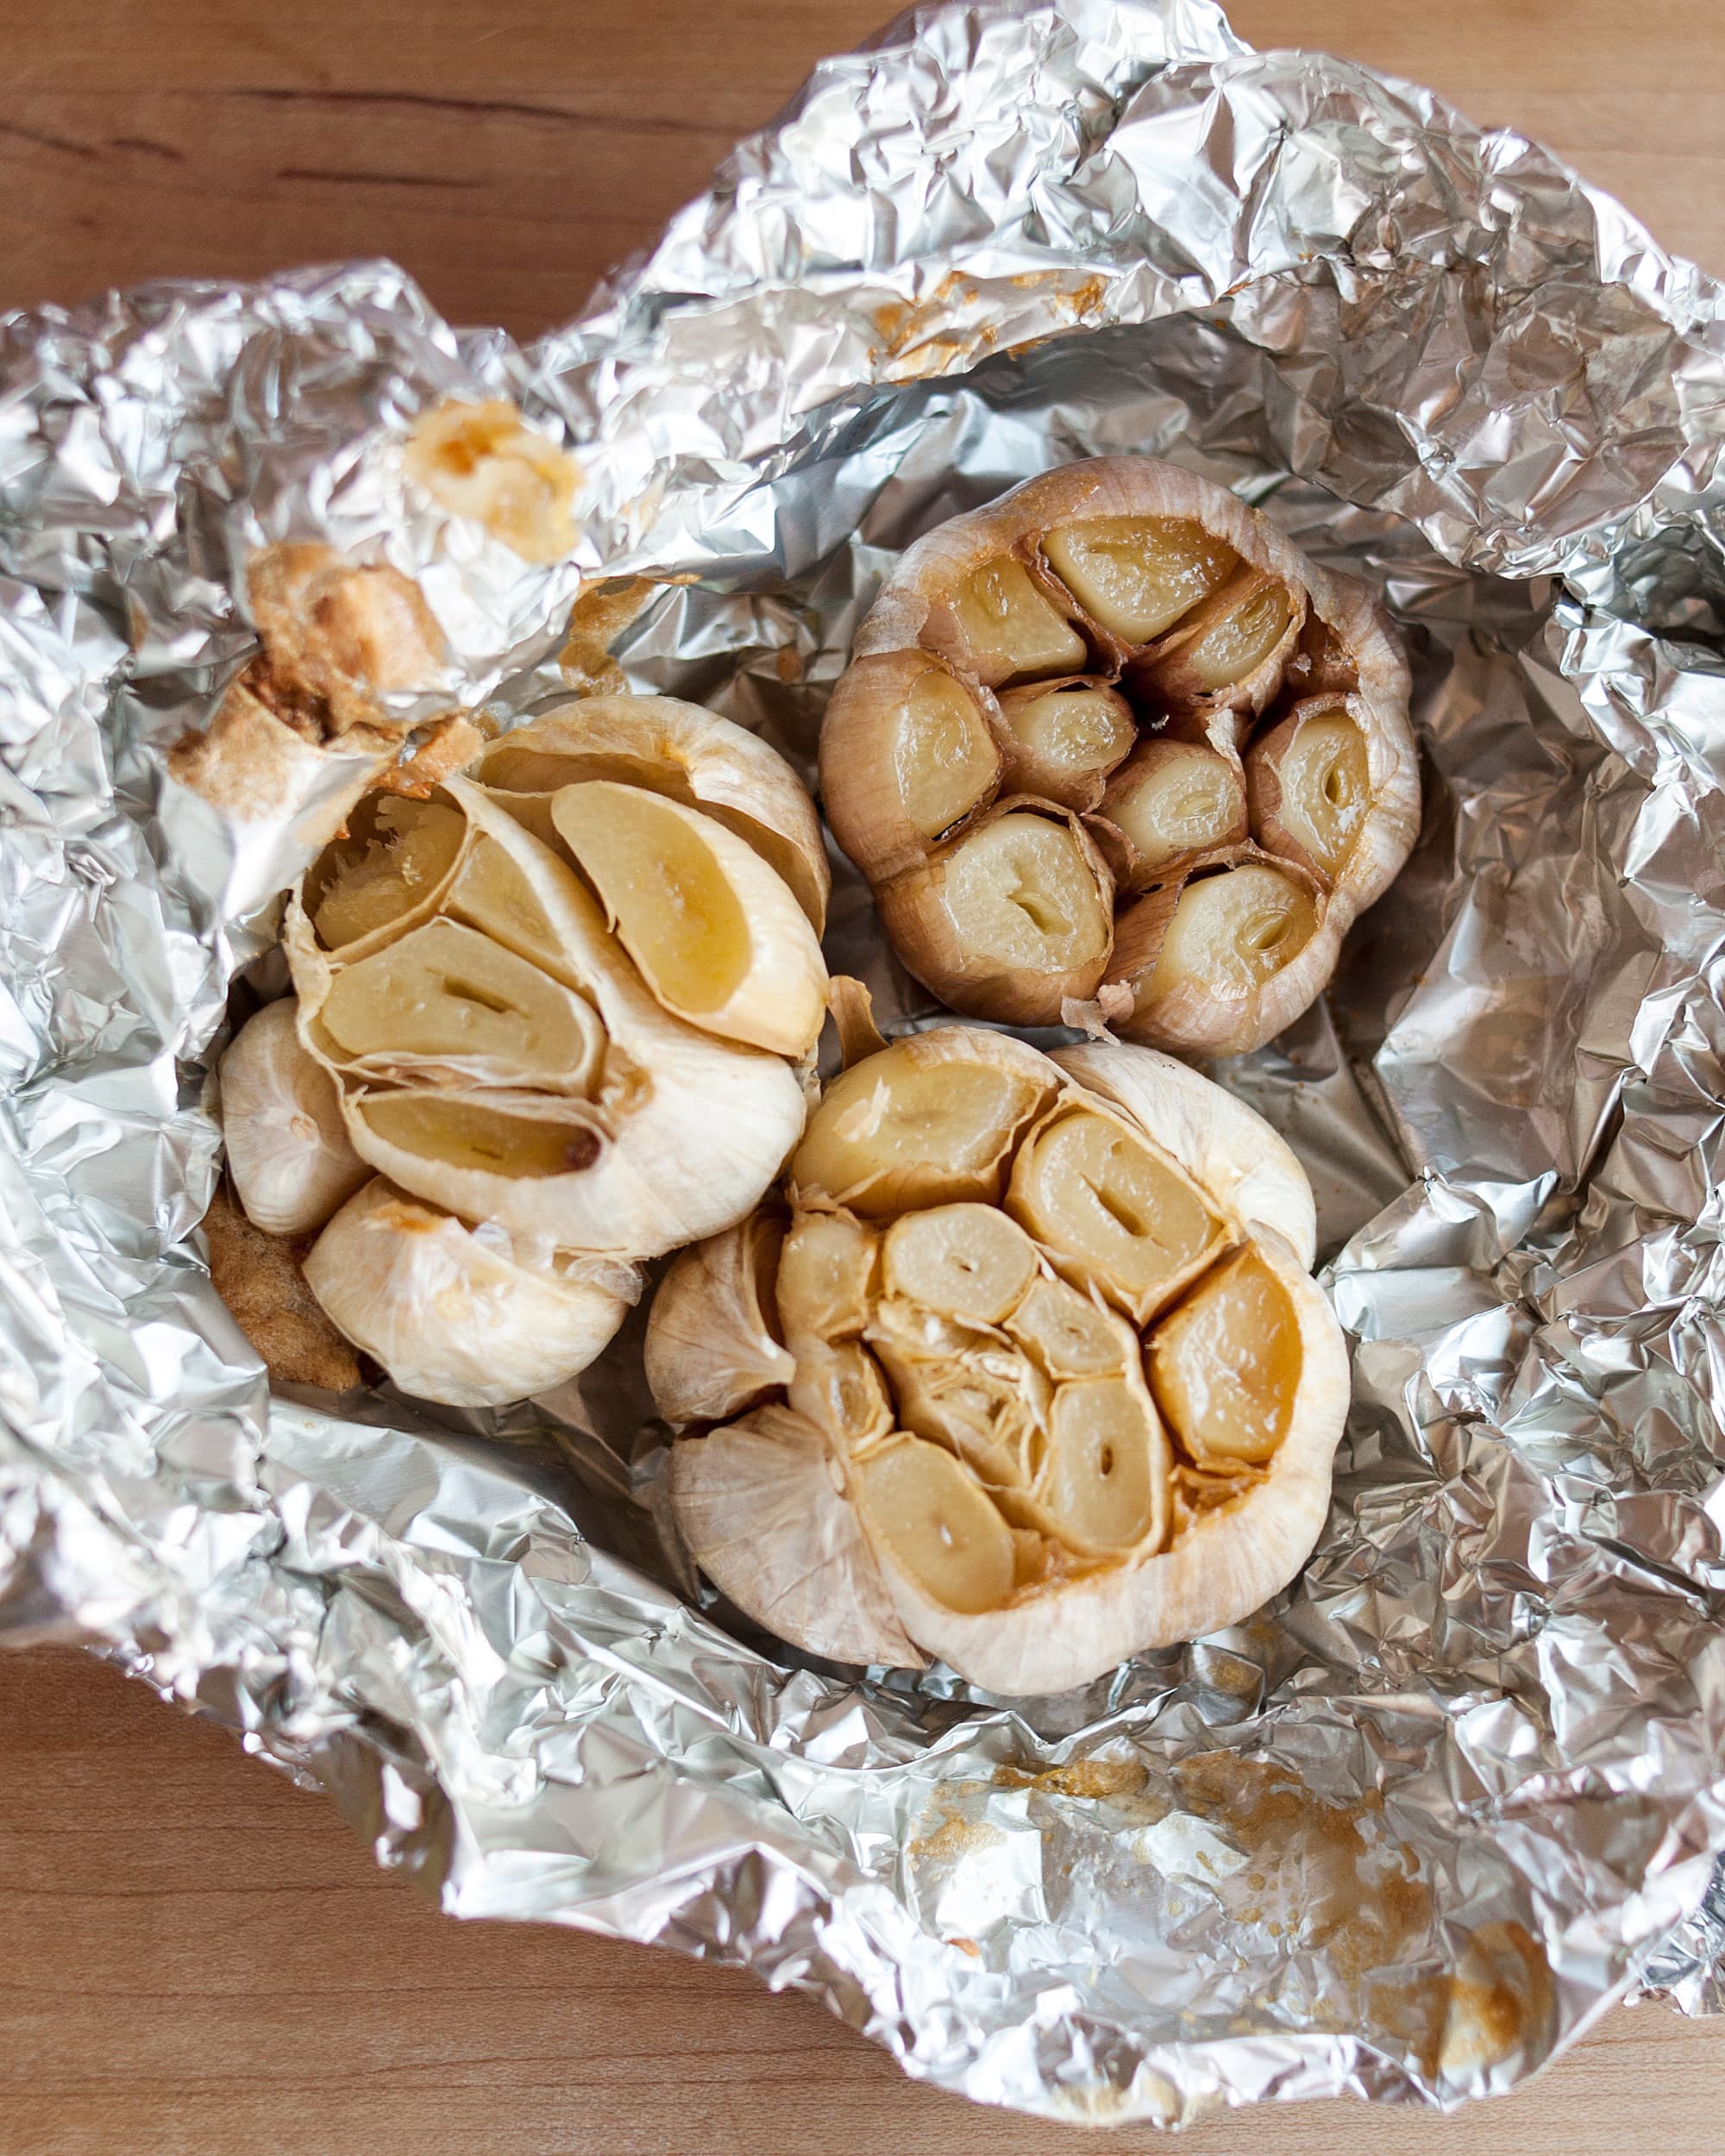 https://cdn.apartmenttherapy.info/image/upload/v1658338088/k/Edit/2022-07-How-To-Roast-Garlic-in-Oven/three_heads_of_garlic_wrapped_in_aluminum_foil.jpg